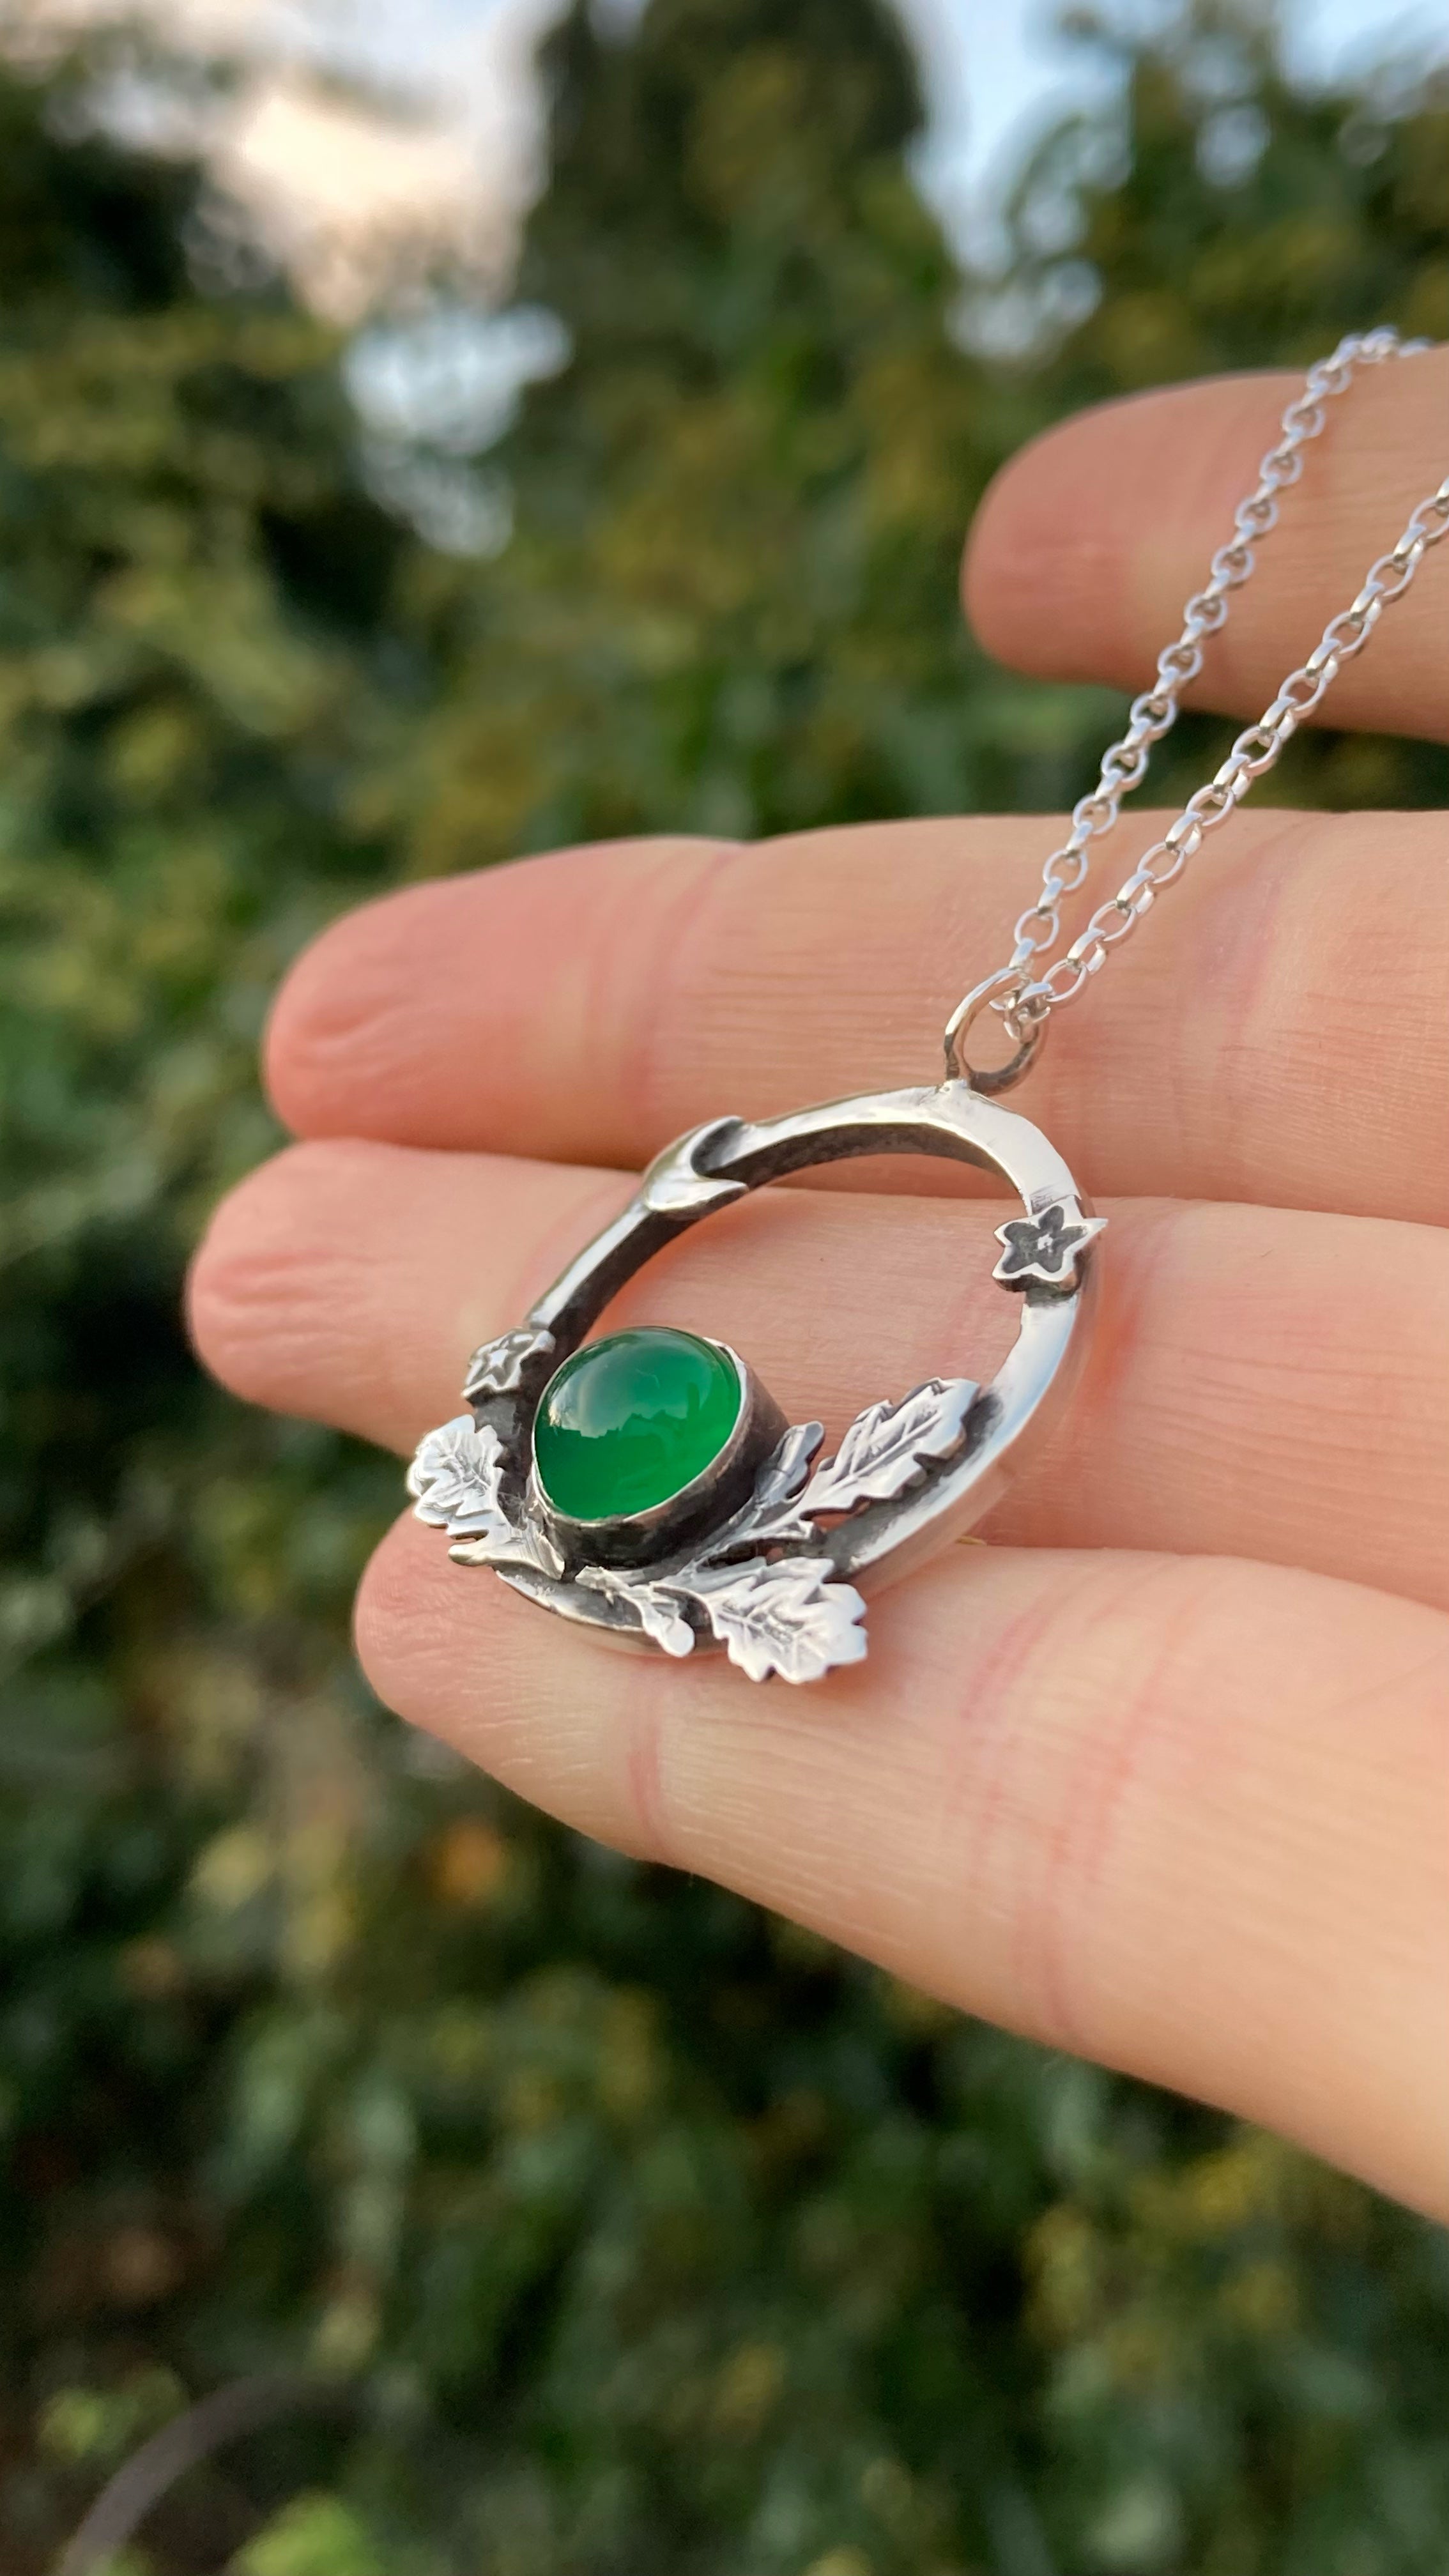 AS ABOVE, SO BELOW ~ Handmade Sterling Silver Necklace with Green Agate